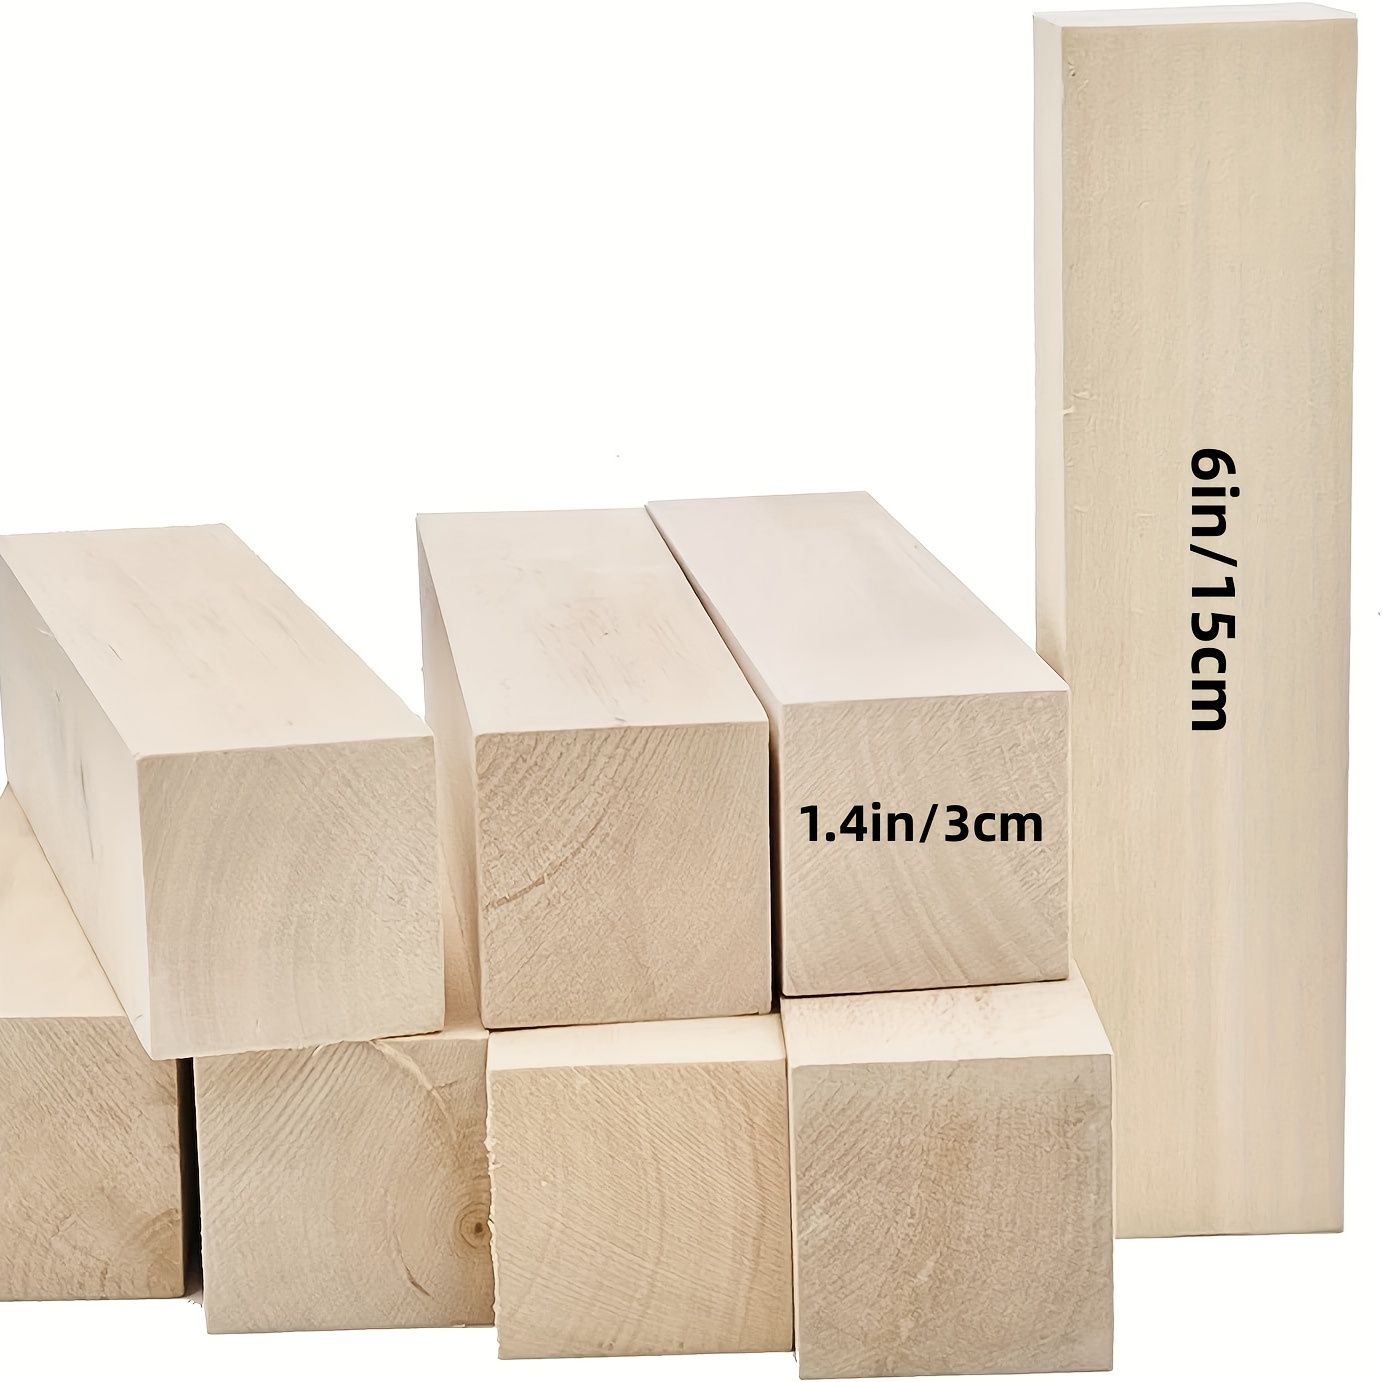 Carving Blocks Basswood For Wood Carving Wood Craft Wood Blocks